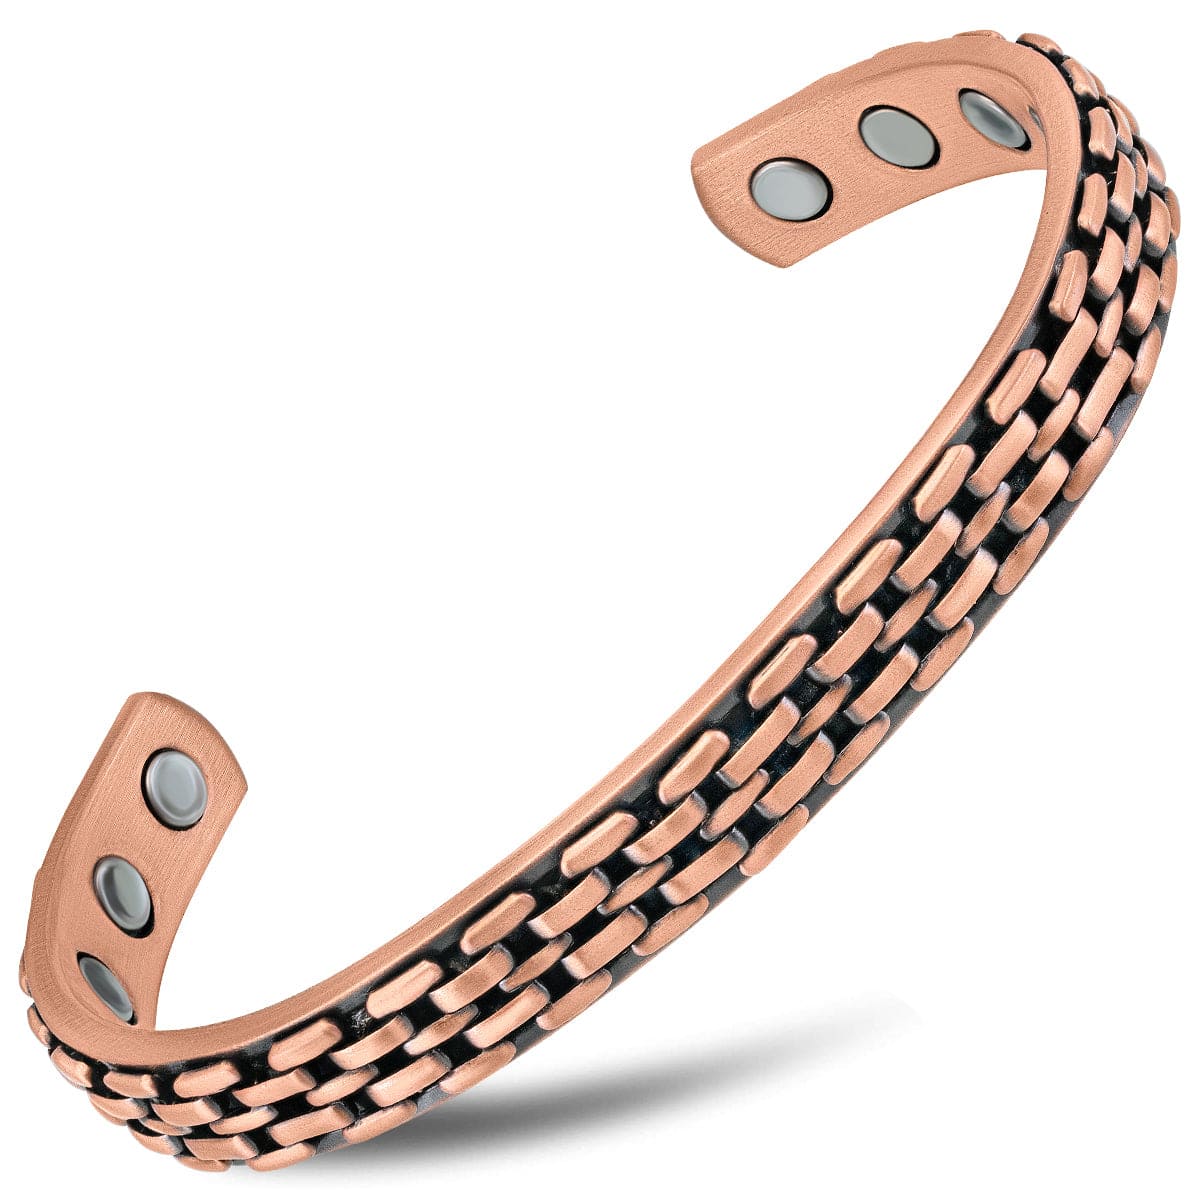 Magnetic Link Chain Inlay Copper Cuff Magnetic Therapy Bracelet for Men & Women MagnetRX